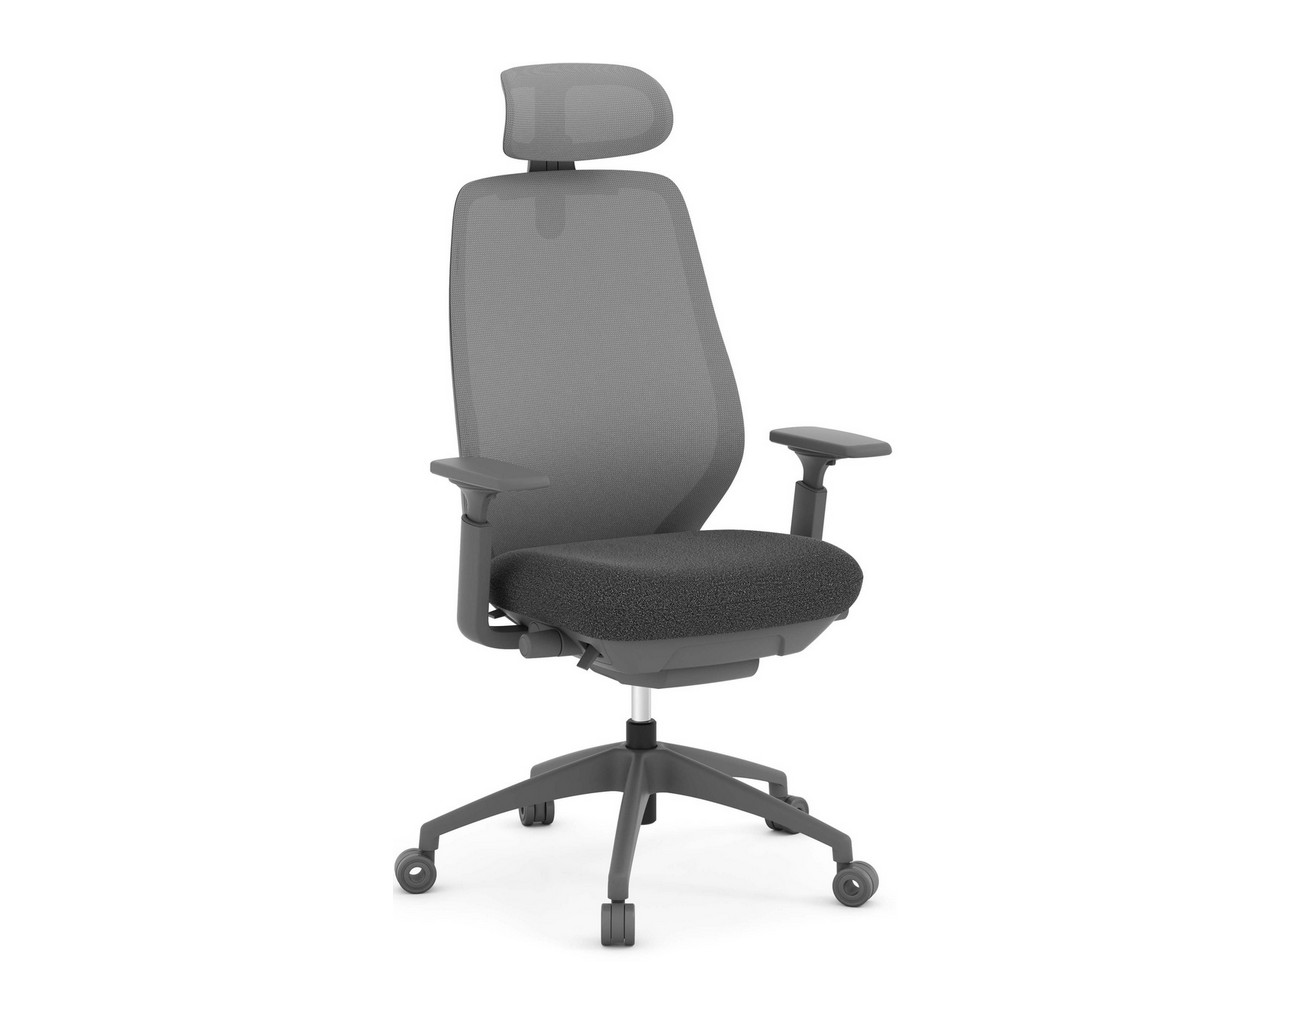 AX Deluxe Executive Chair with Headrest